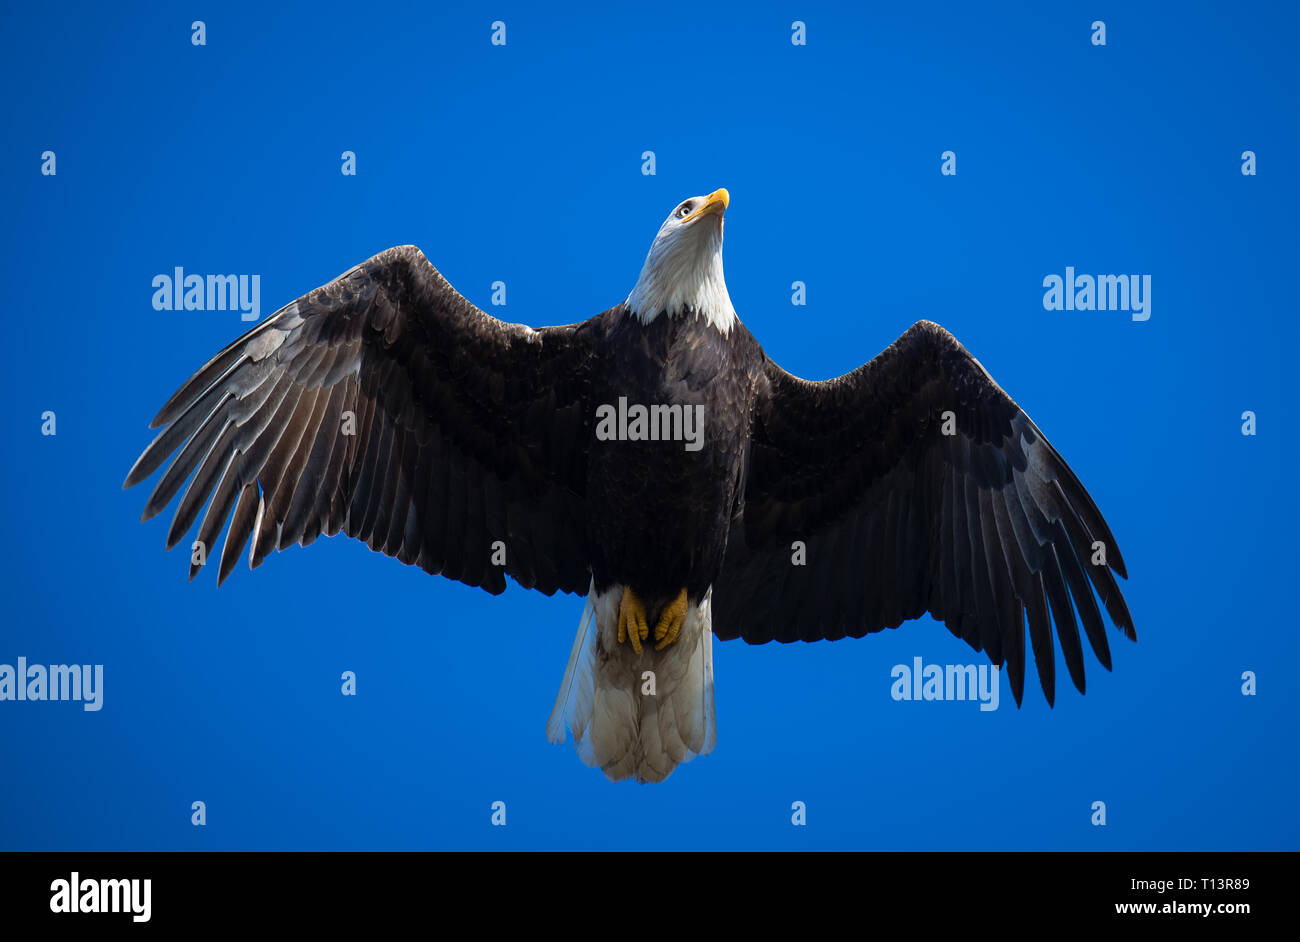 Adult bald eagle soaring skyward. Boundary Bay near Vancouver, BC, was home to thousands of bald eagles in winter of 2016, attracted by a local dump. Stock Photo